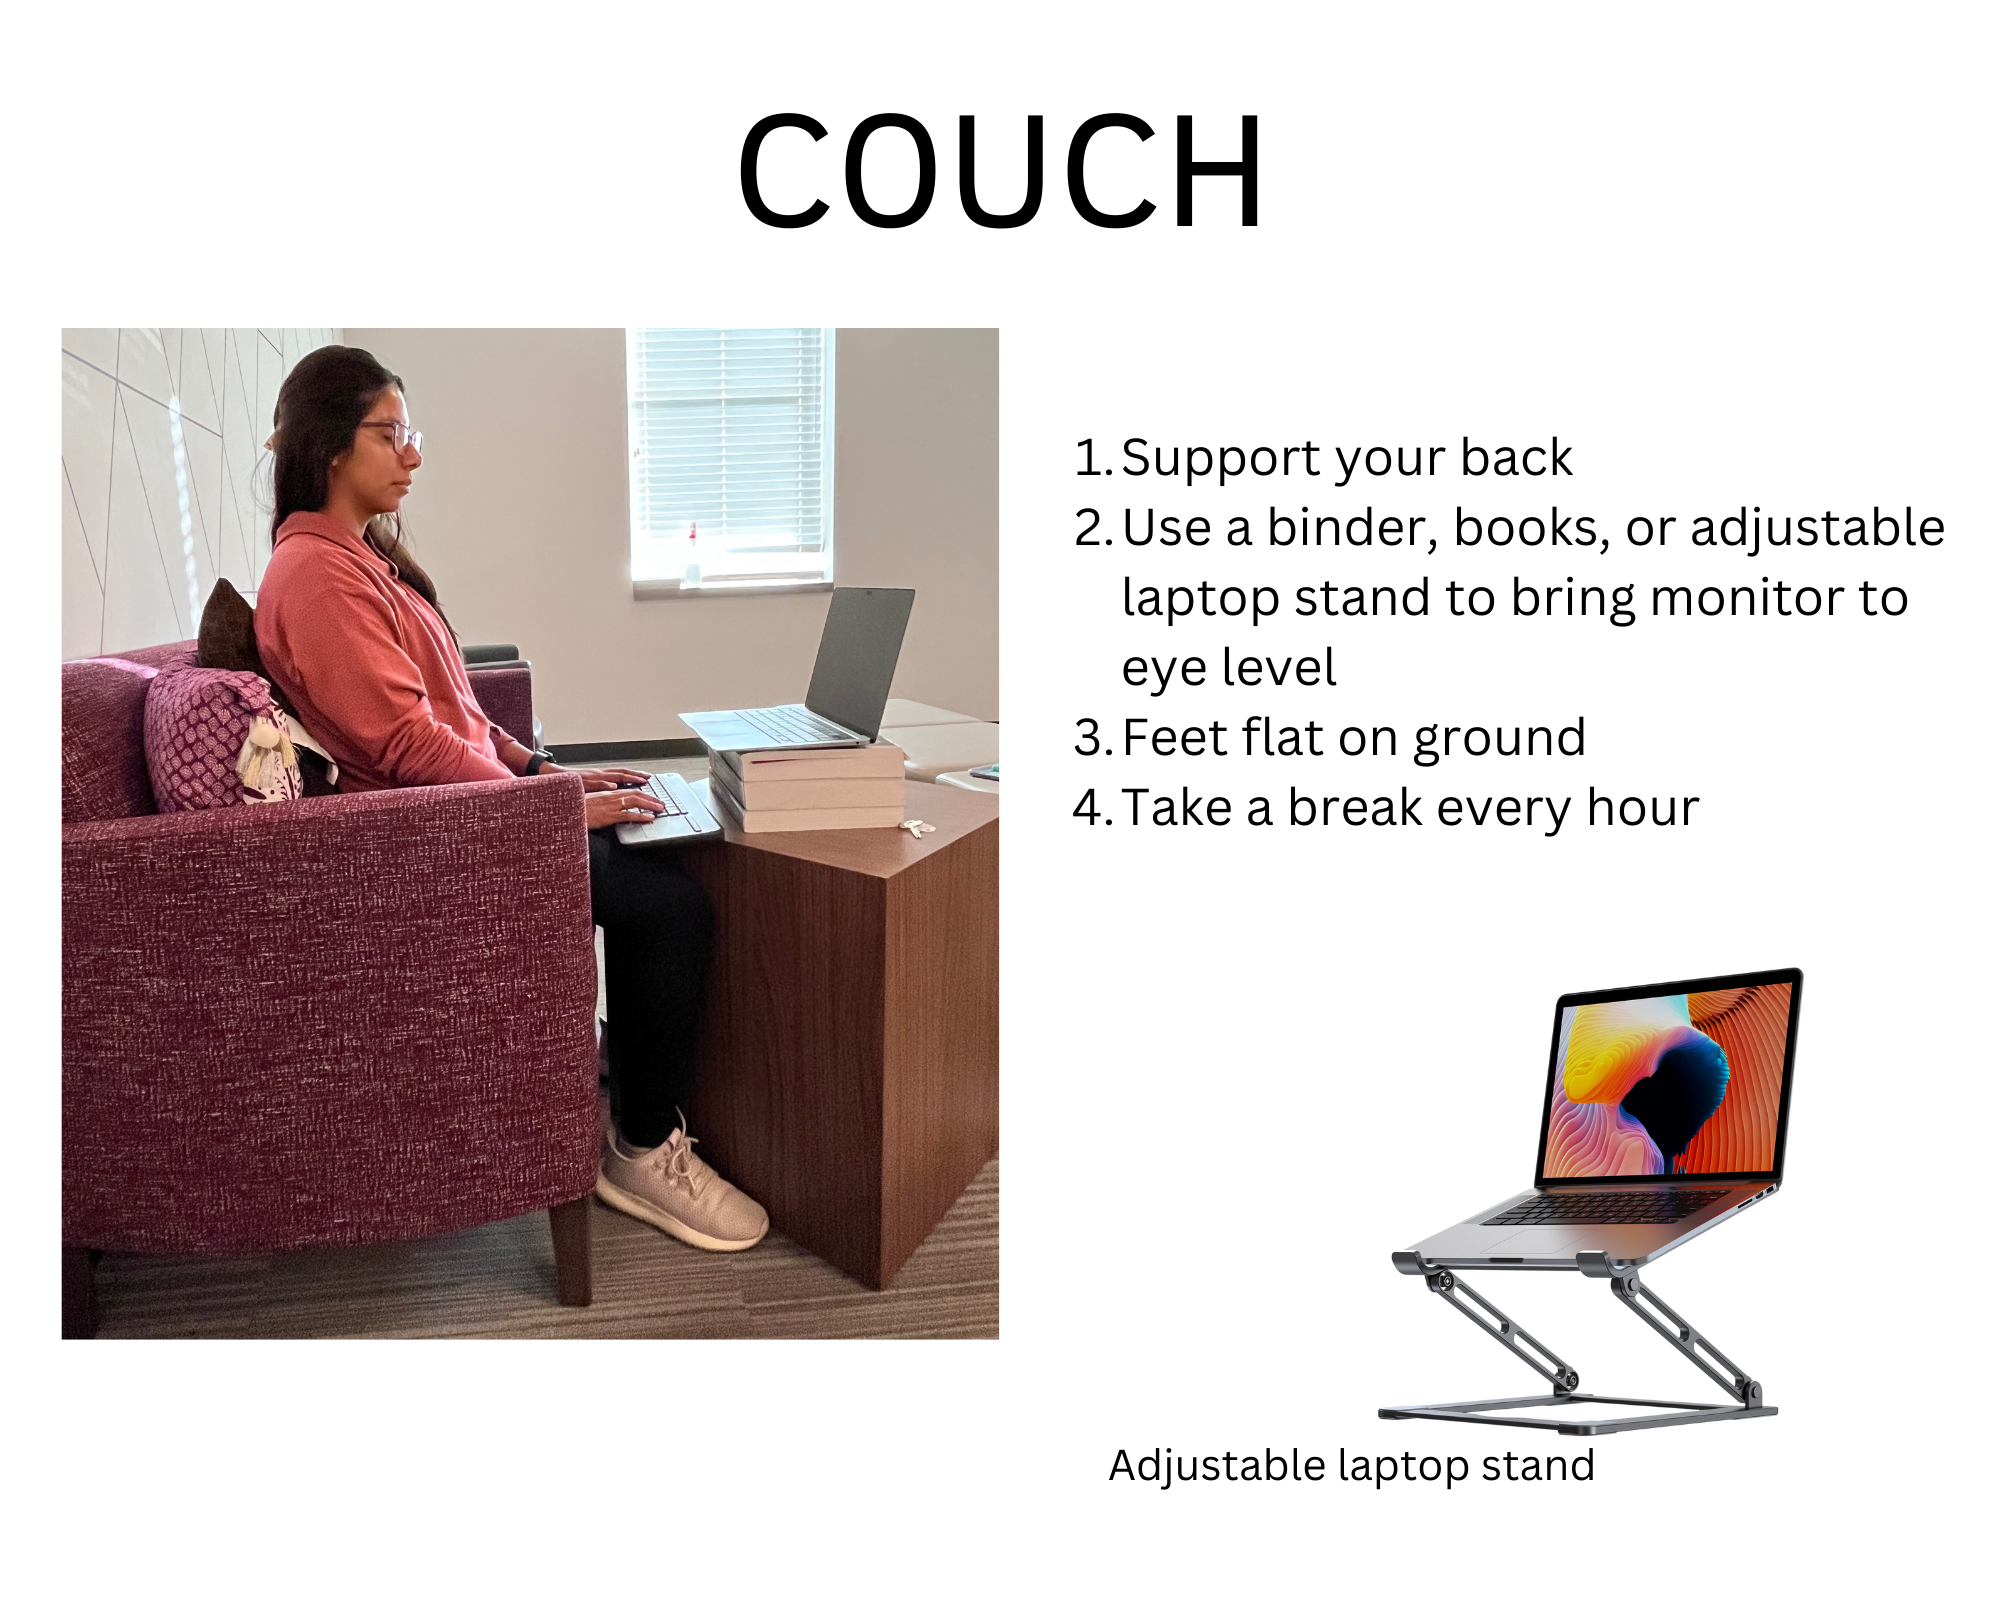 Student sitting on couch with laptop on accent table. Black text on white background: "Couch: 1. Support your back 2. Use a binder, books, or adjustable laptop stand to bring monitor to eye level 3. Feet flat on ground 4. Take a break every hour". An adjustable laptop stand is featured as a product.